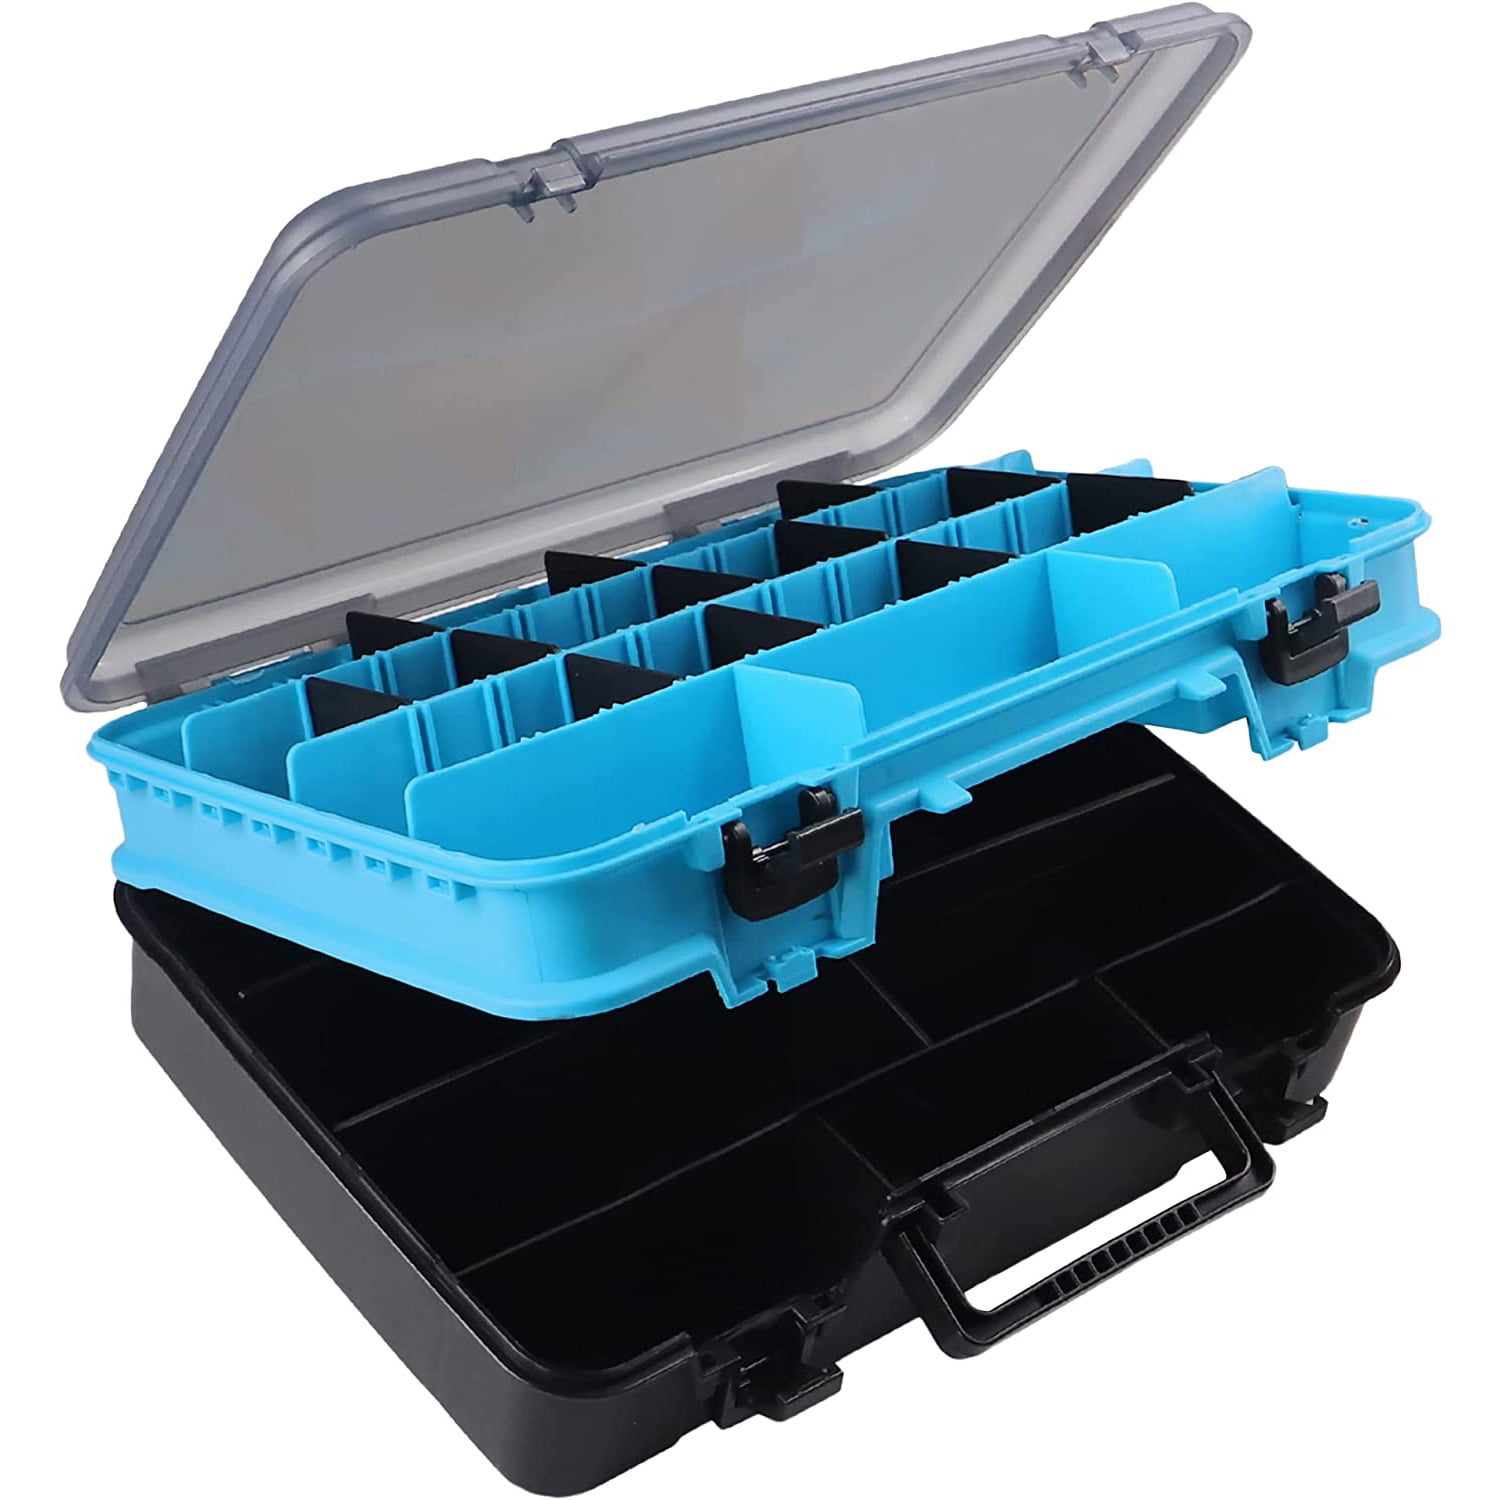 4 Layer Fishing Tackle Box, Classified Portable Utility Fishing Tackle Box  4 Layers For Boat Fishing For Sea Fishing 